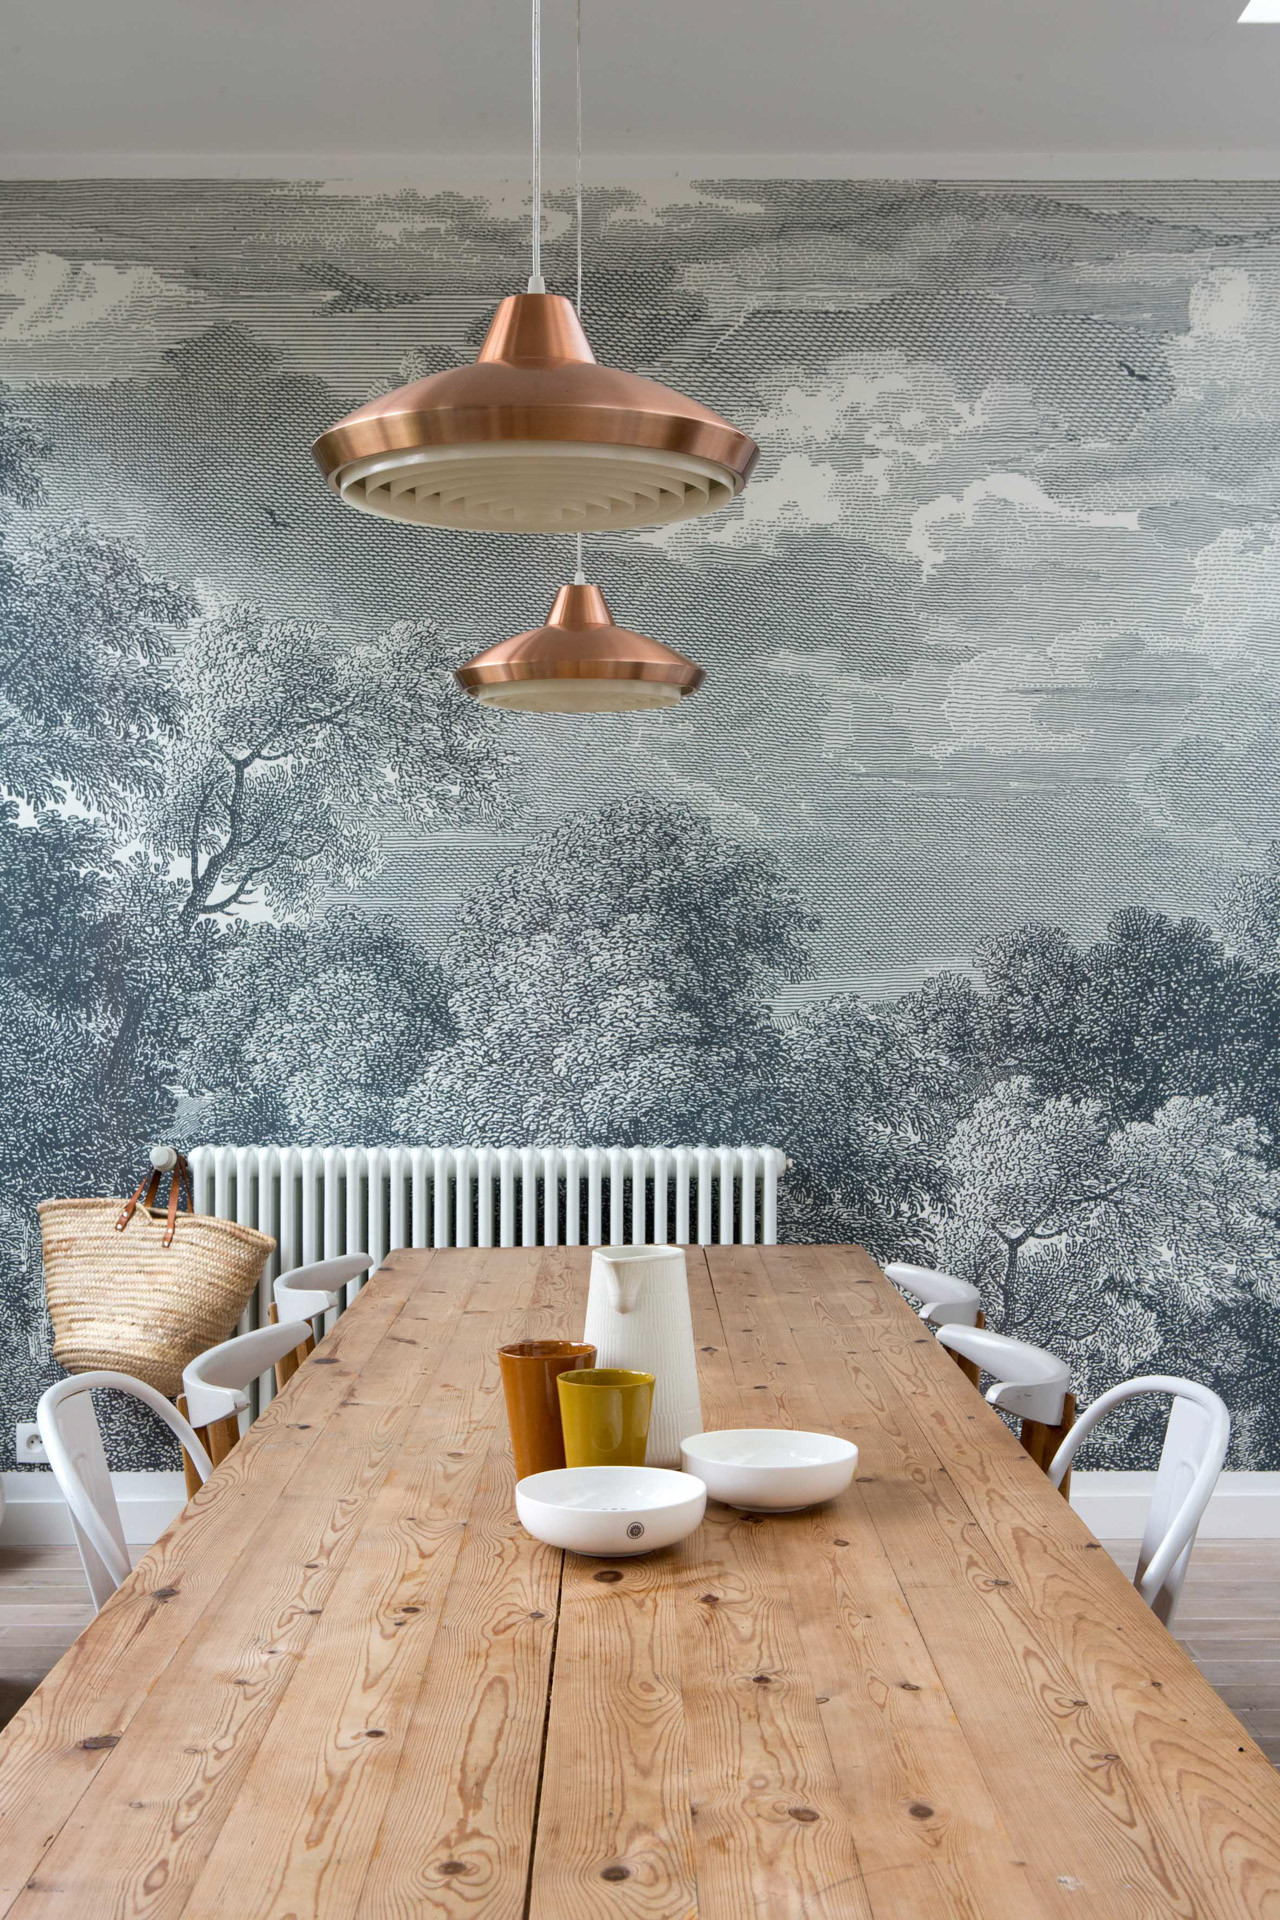 75 Wallpaper Dining Room Ideas You'll Love - March, 2023 | Houzz